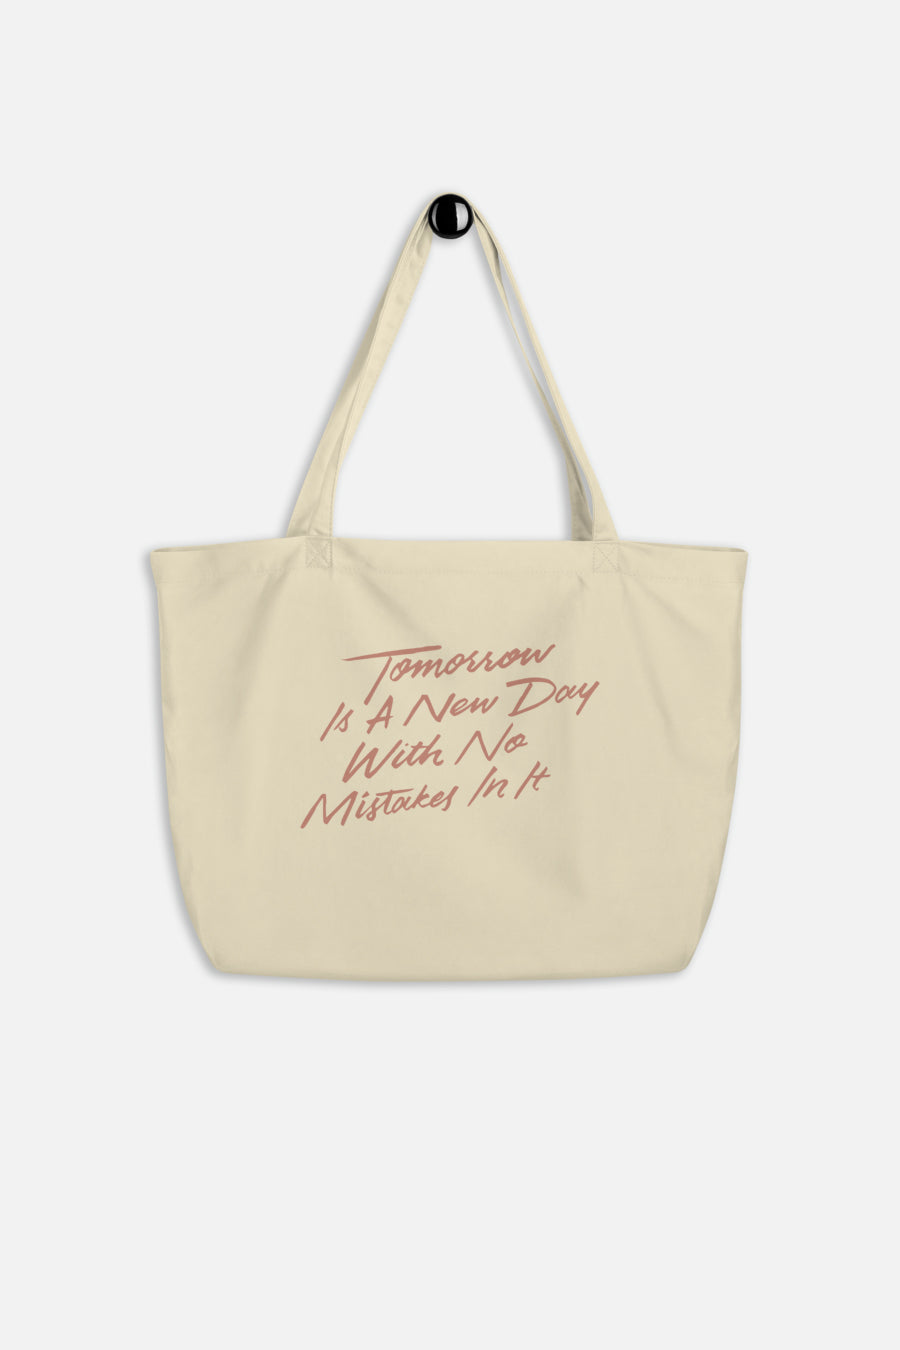 Tomorrow is a New Day Large Eco Tote Bag | Anne of Green Gables